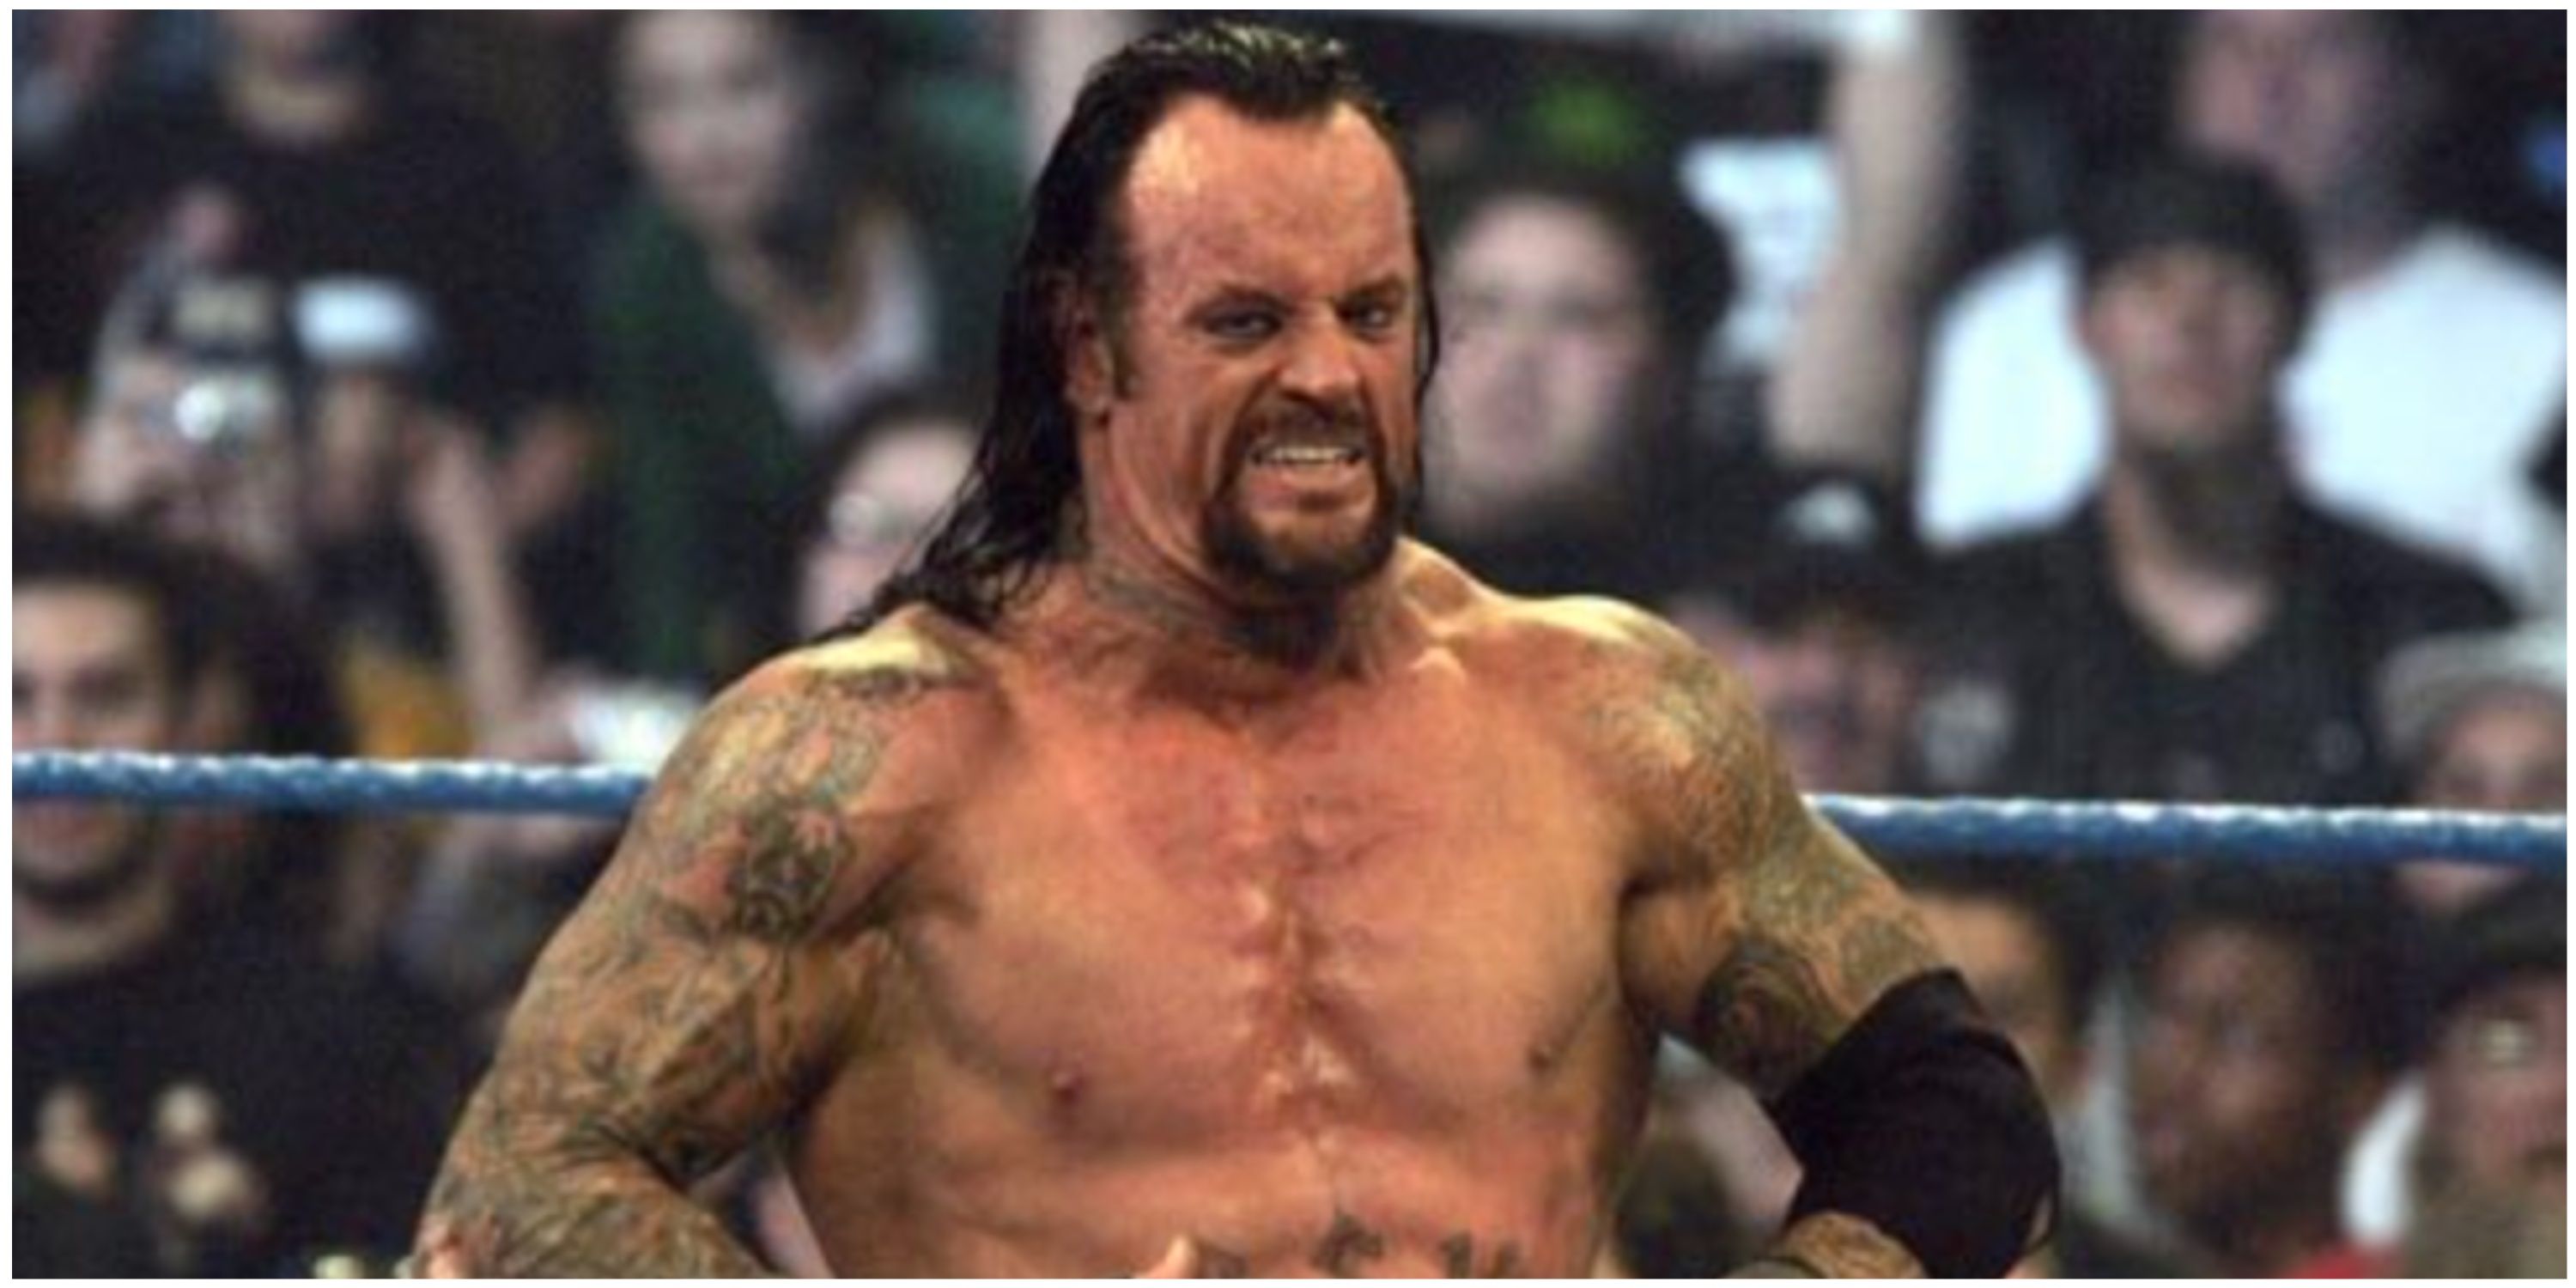 WWE Rare photo of The Undertaker getting his first tattoo emerges